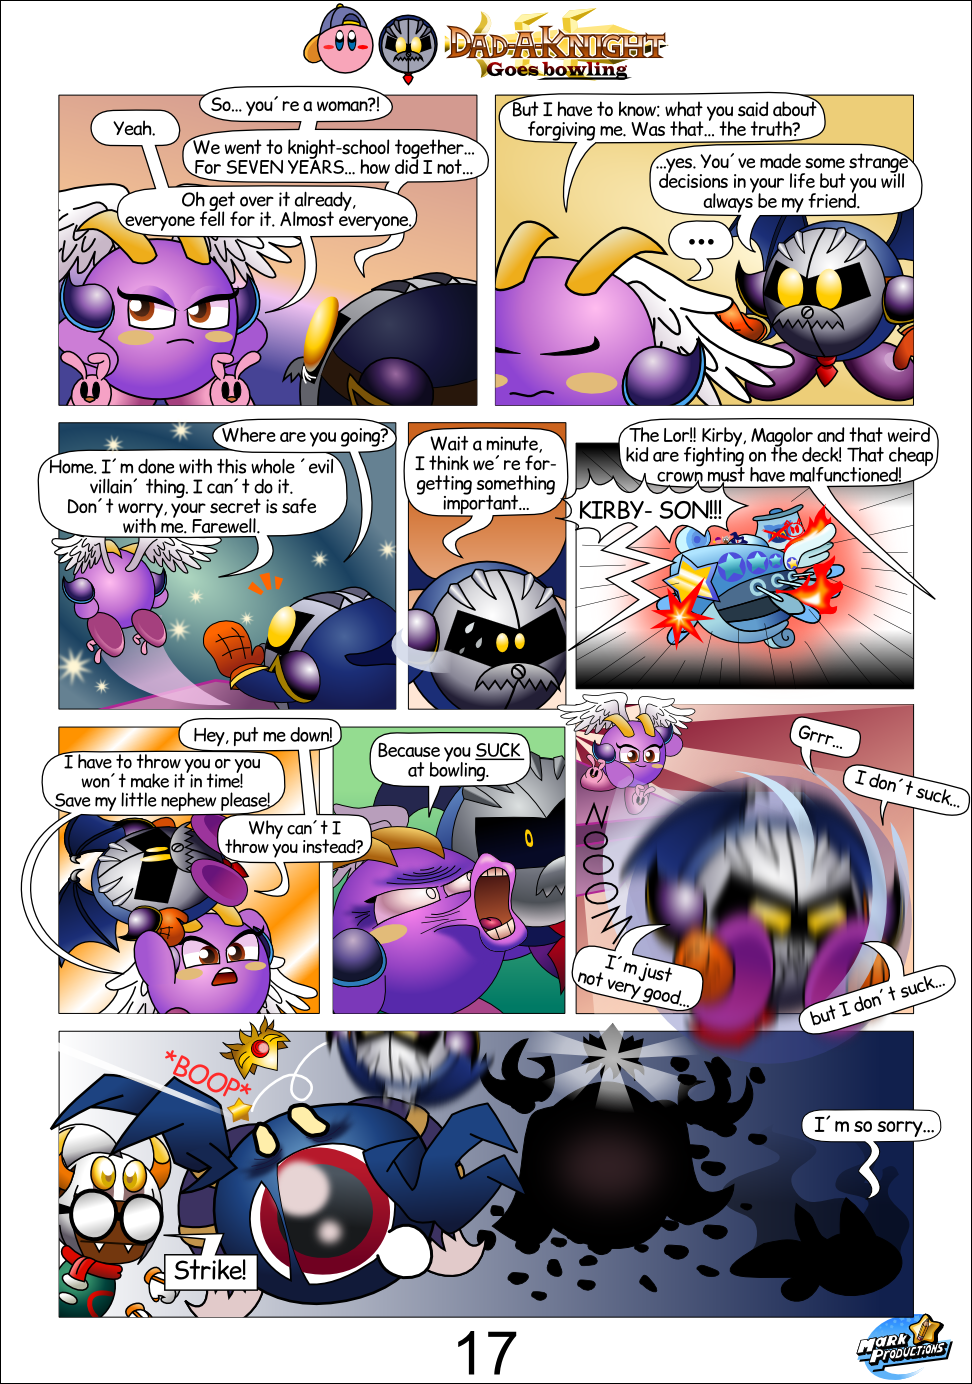 Dad-A-Knight Goes Bowling - page 17